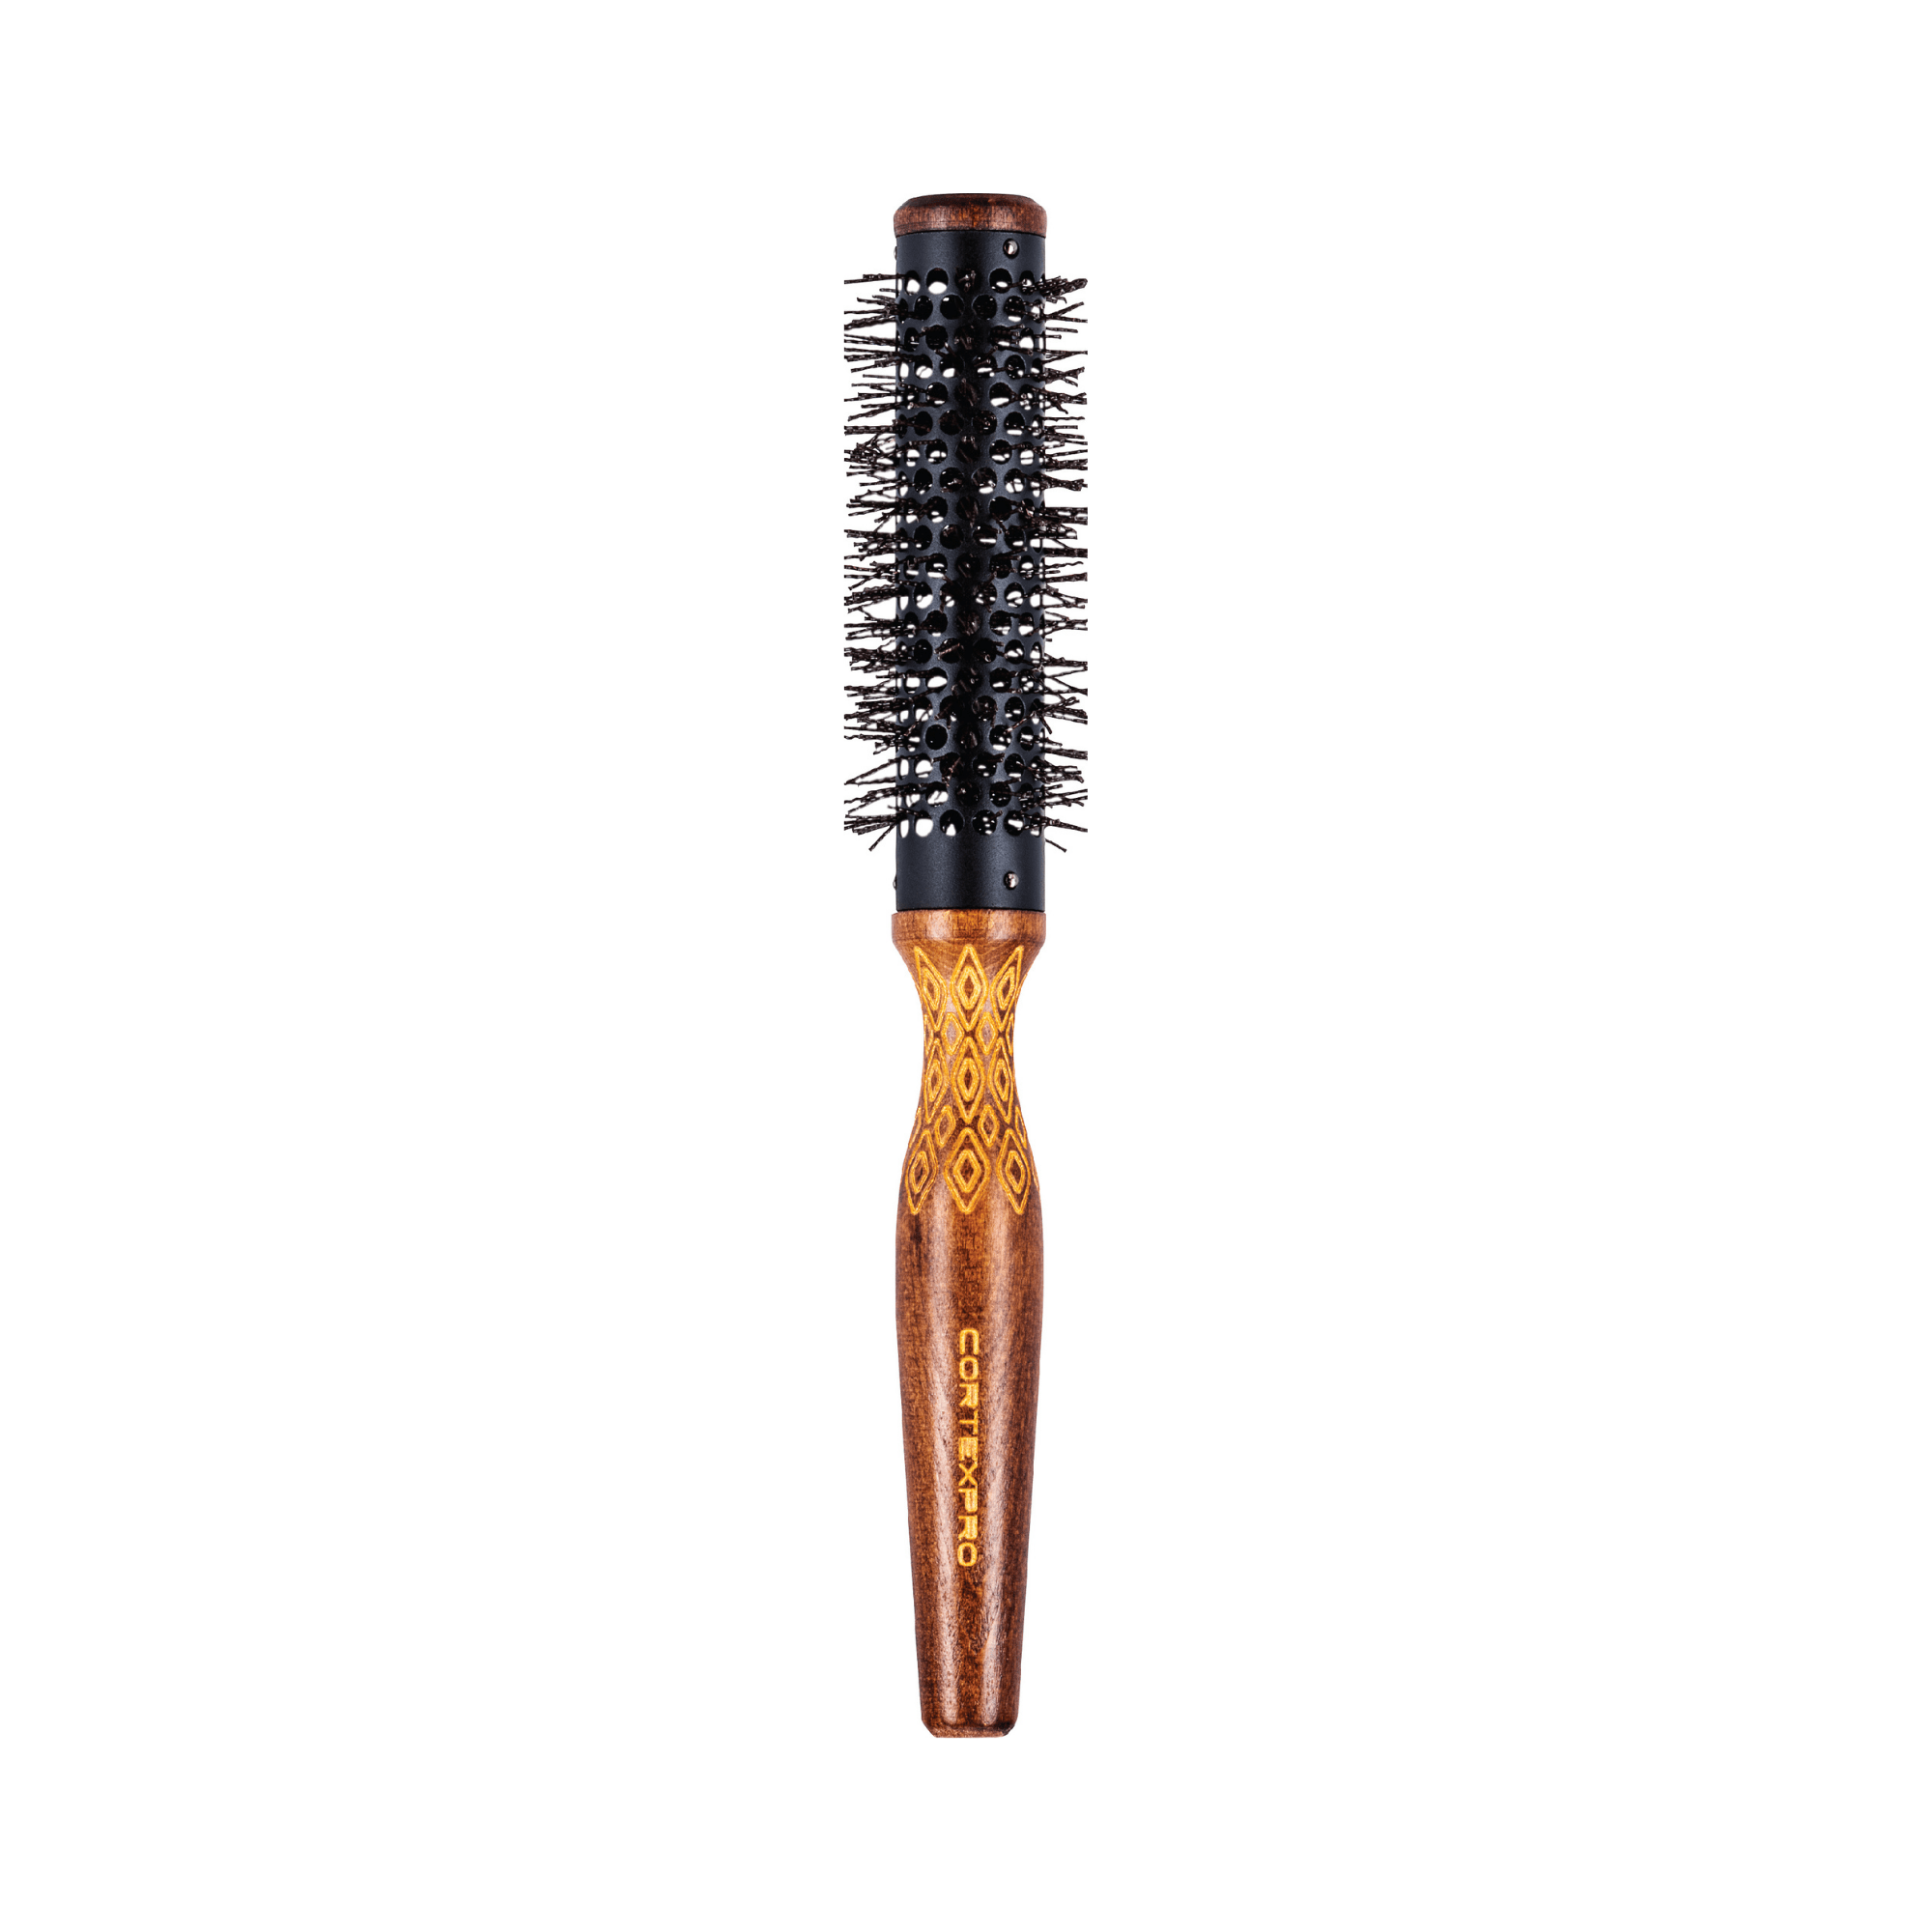 CortexPro Thermal Heat Activated Round Brush – Bristles Heat to 140F and change color when exposed to heat